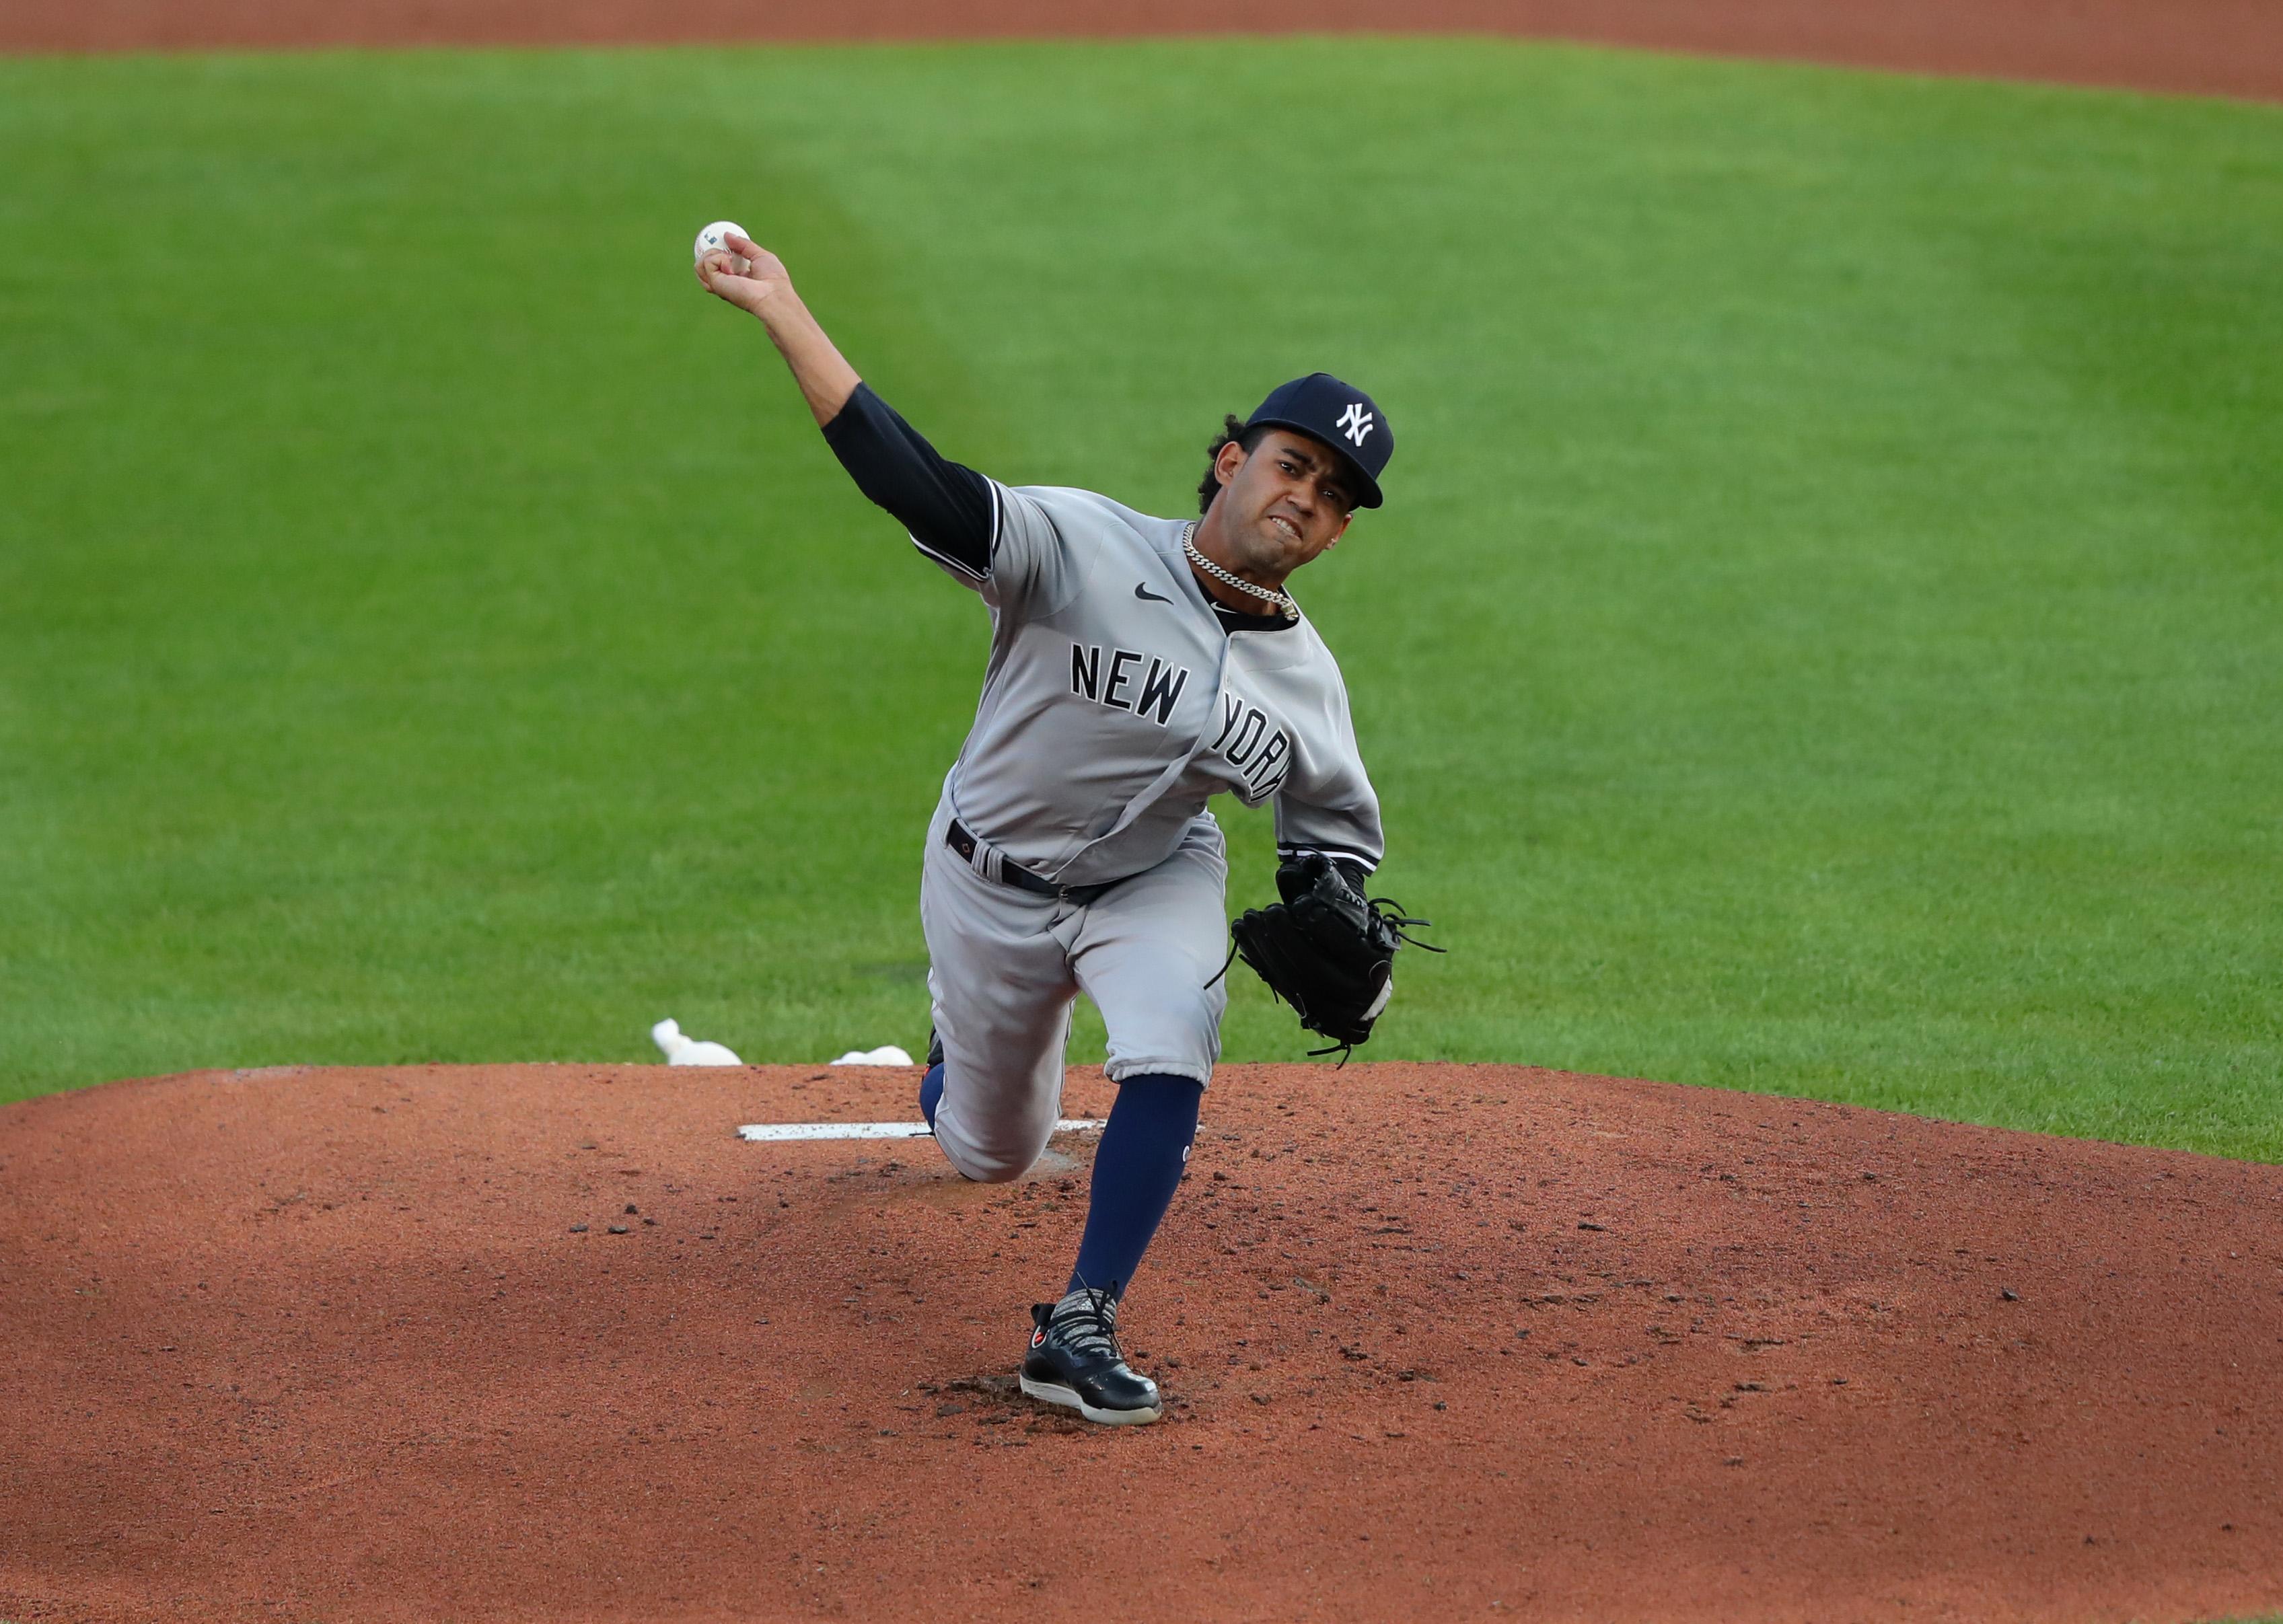 Sep 9, 2020; Buffalo, New York, USA; New York Yankees starting pitcher Deivi Garcia (83) throws a pitch during the first inning against the Toronto Blue Jays at Sahlen Field. Mandatory Credit: Timothy T. Ludwig-USA TODAY Sports / Timothy T. Ludwig-USA TODAY Sports